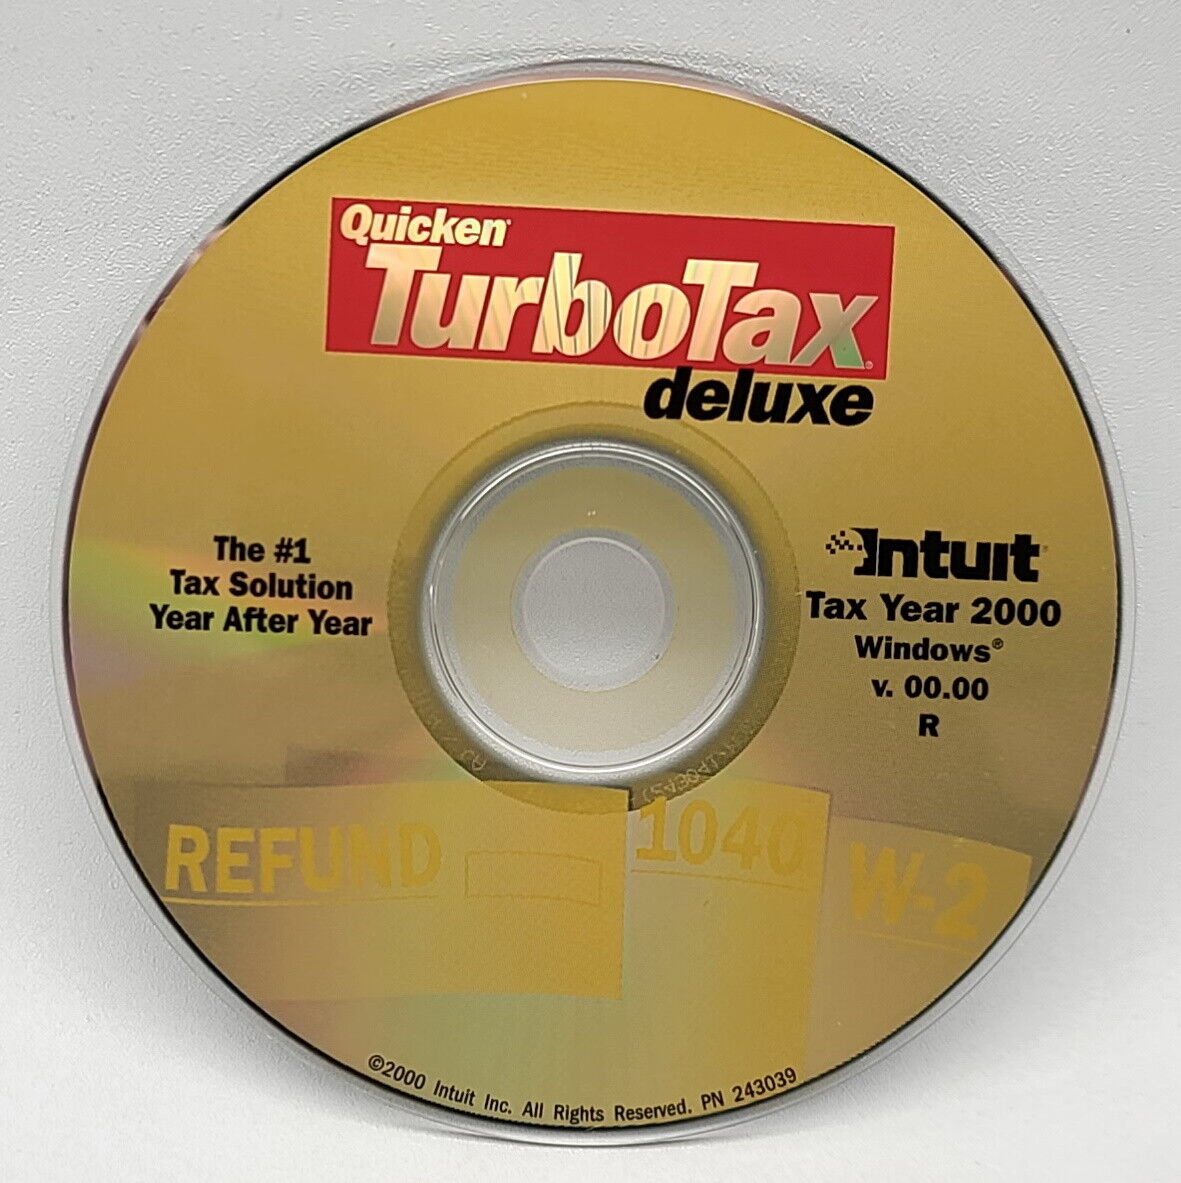 ⭐️ Intuit Quicken TurboTax Deluxe 2000 Software Installation CD - PC CD-ROM